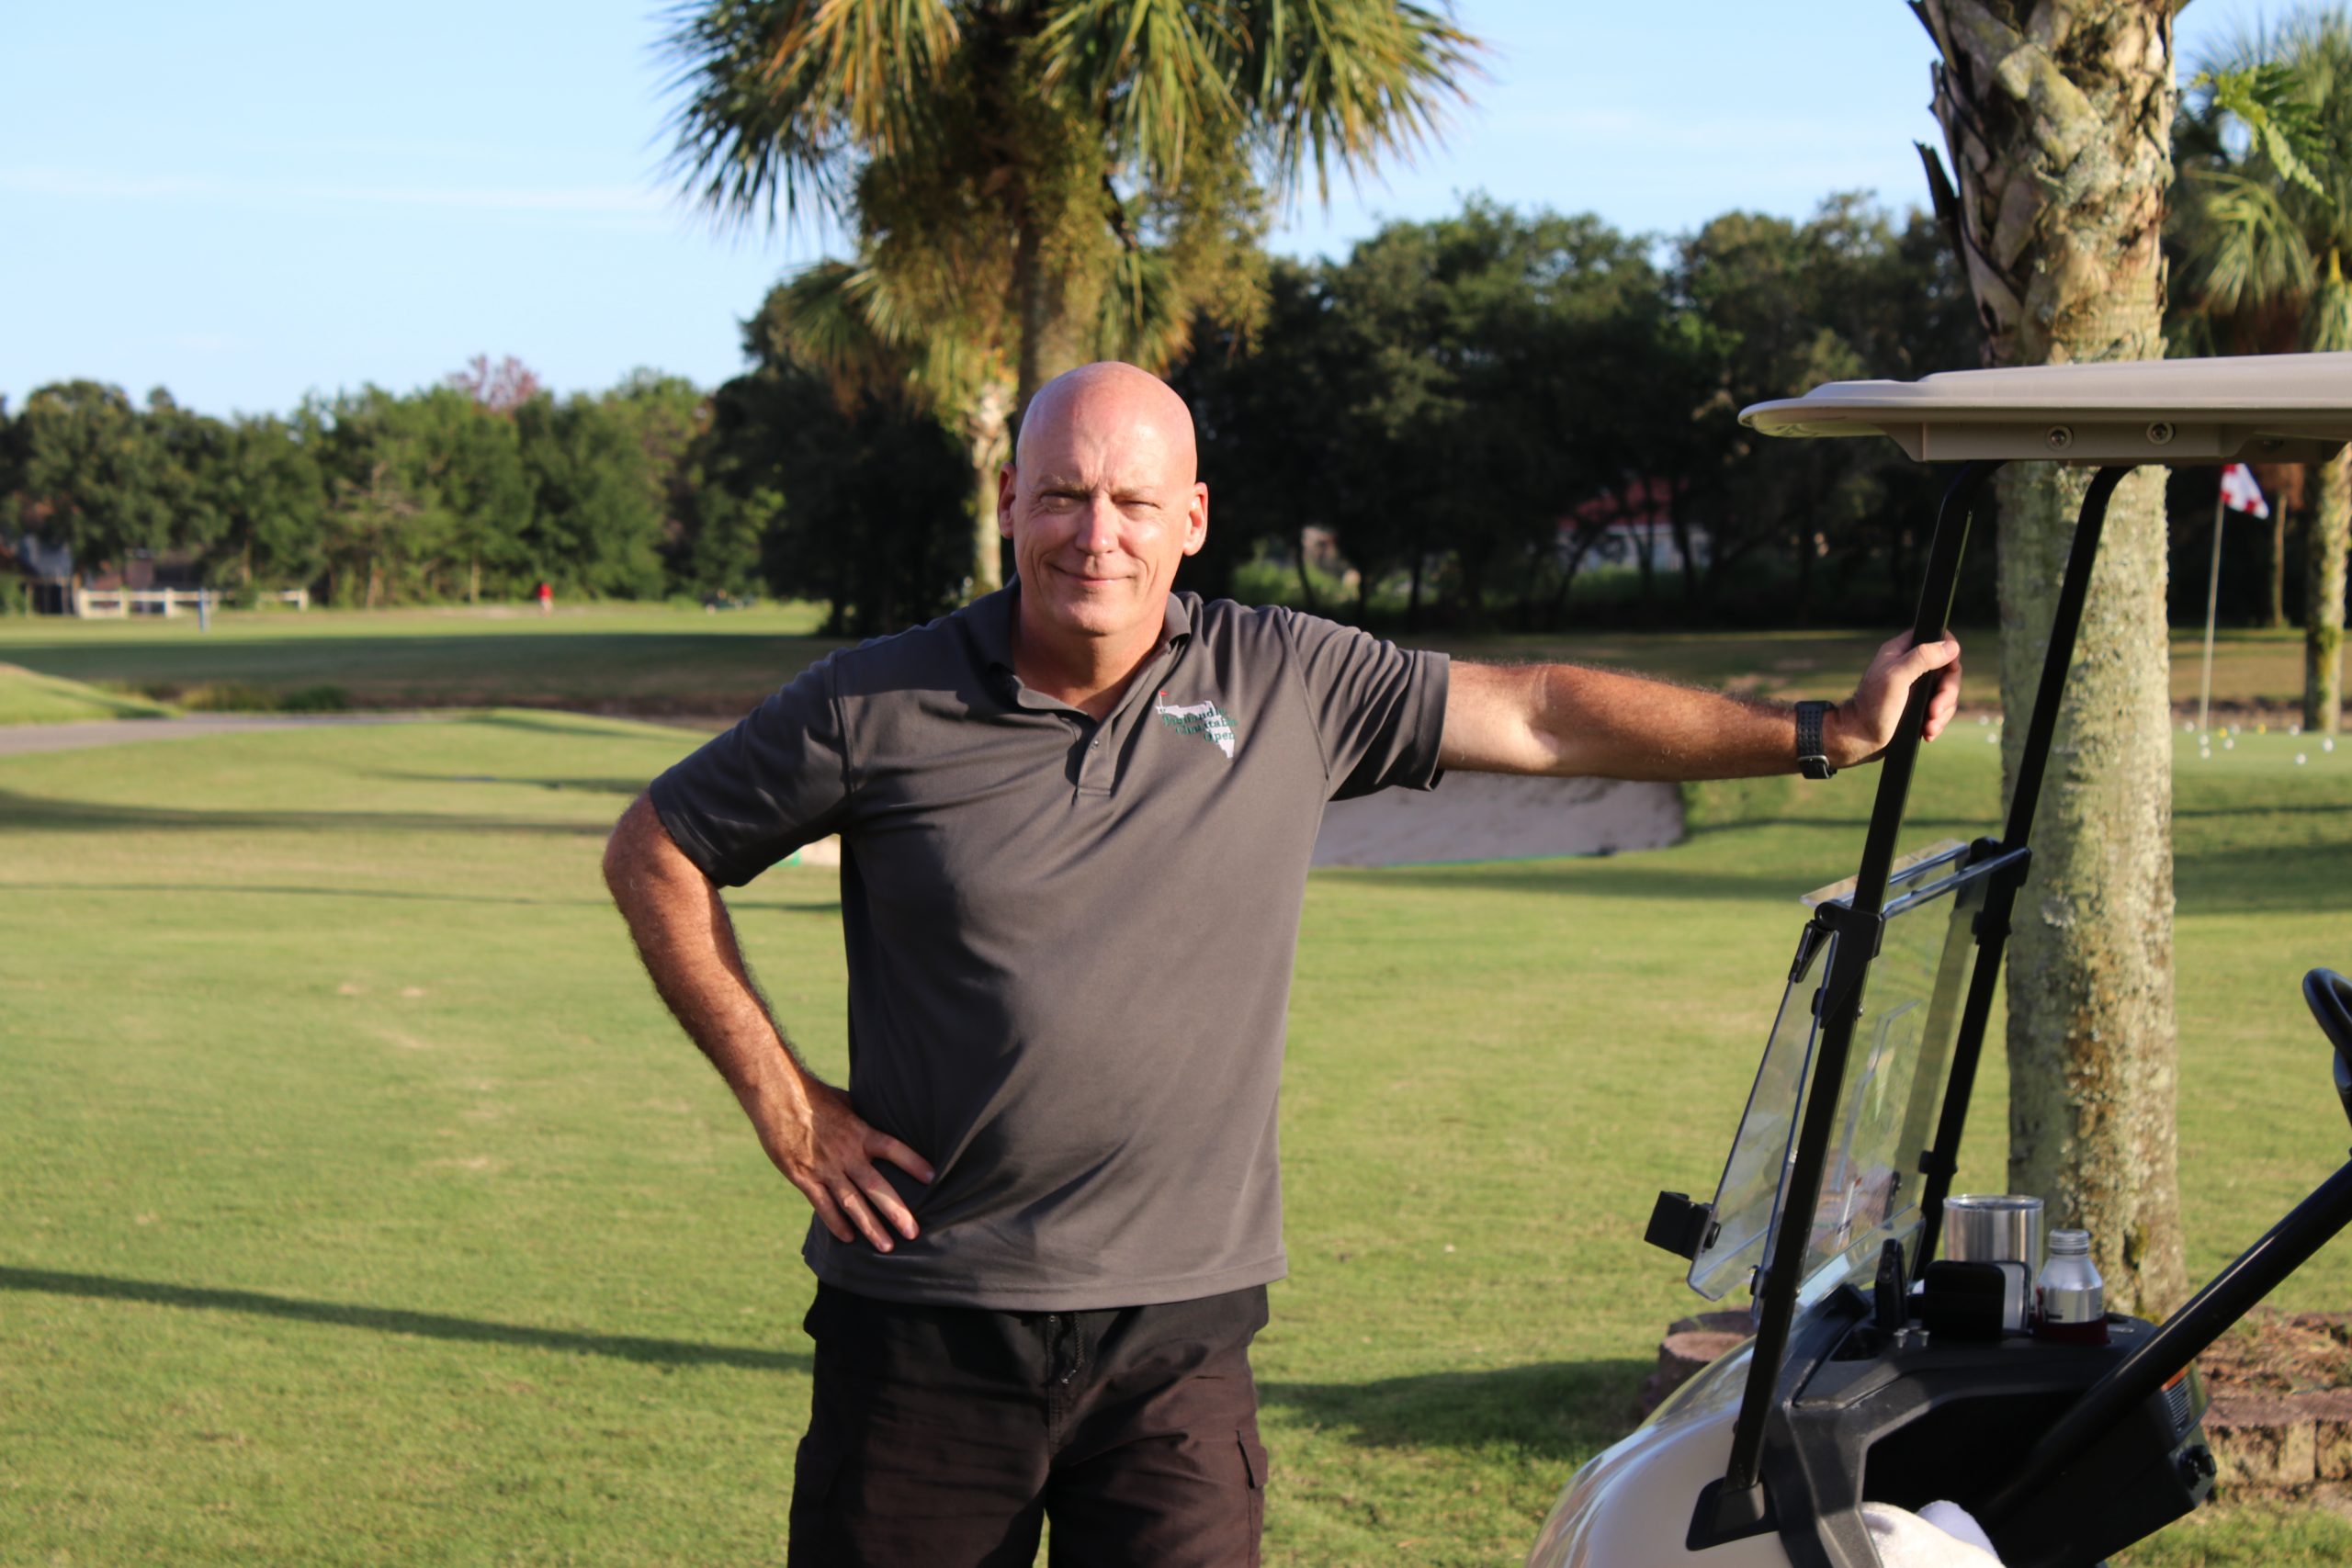 A bald man in a black polo shirt stands smiling beside a golf cart on a sunny golf course, with palm trees in the background.